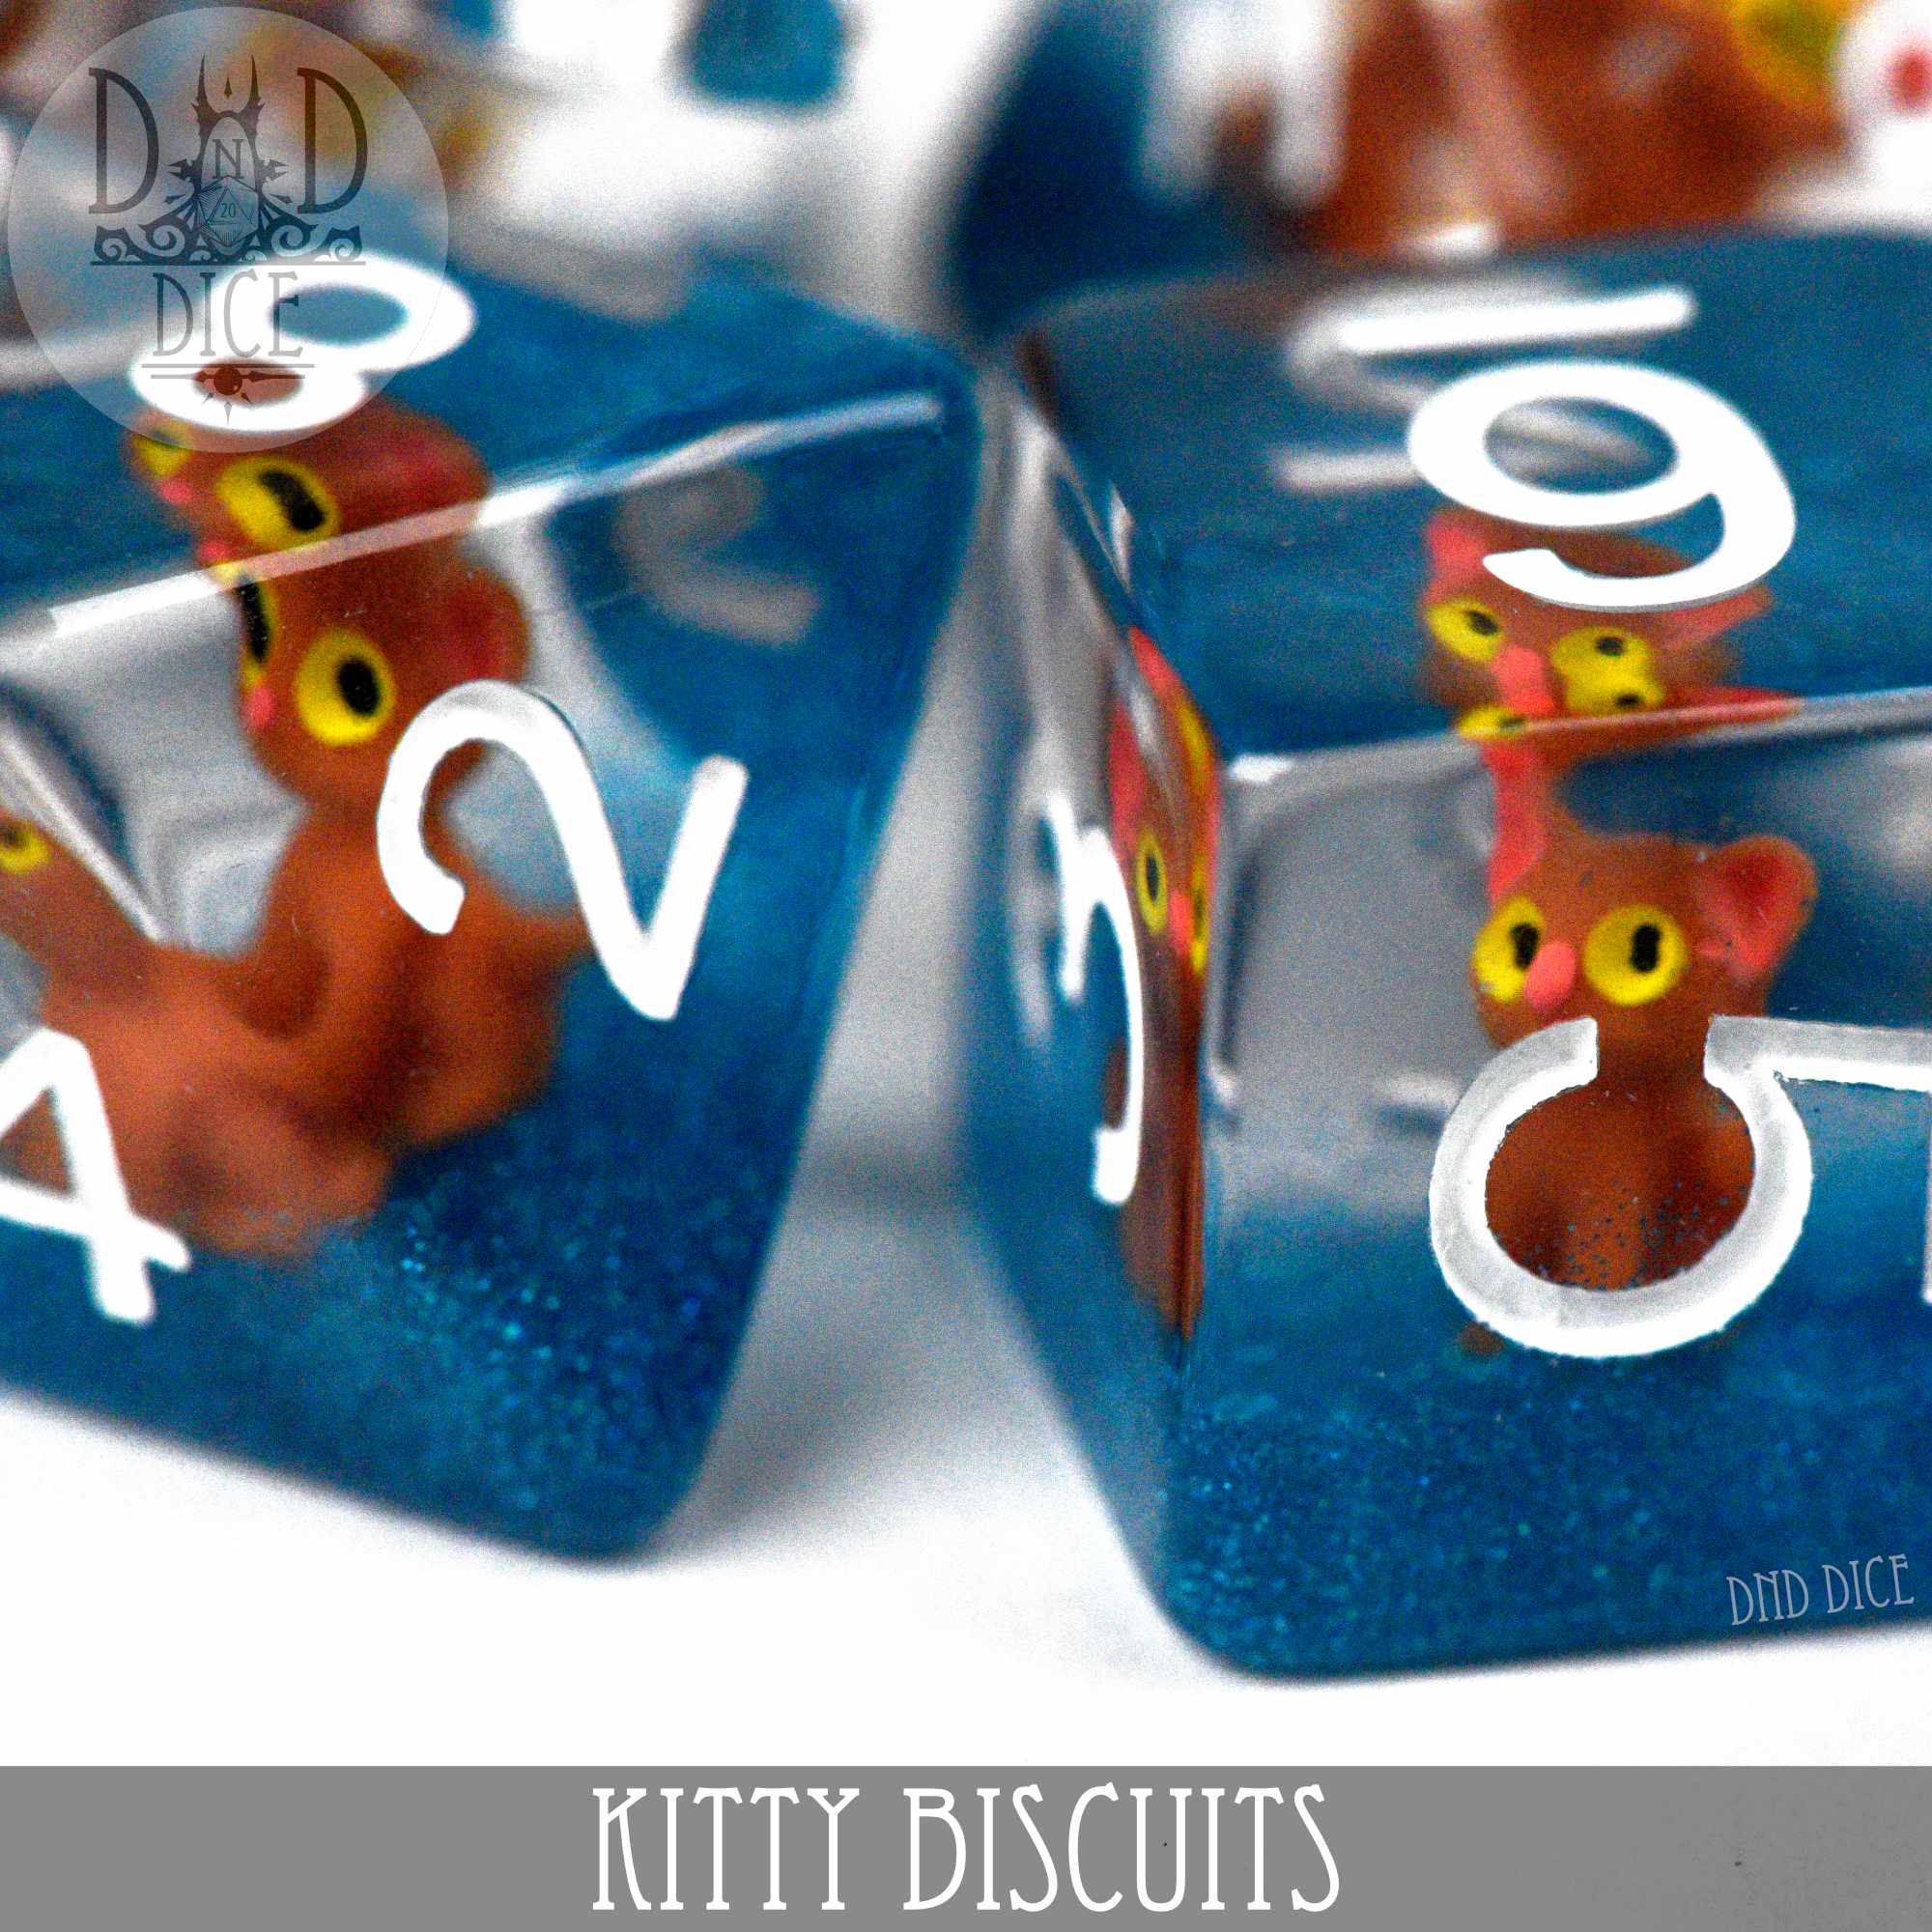 Kitty Biscuits Dice Set